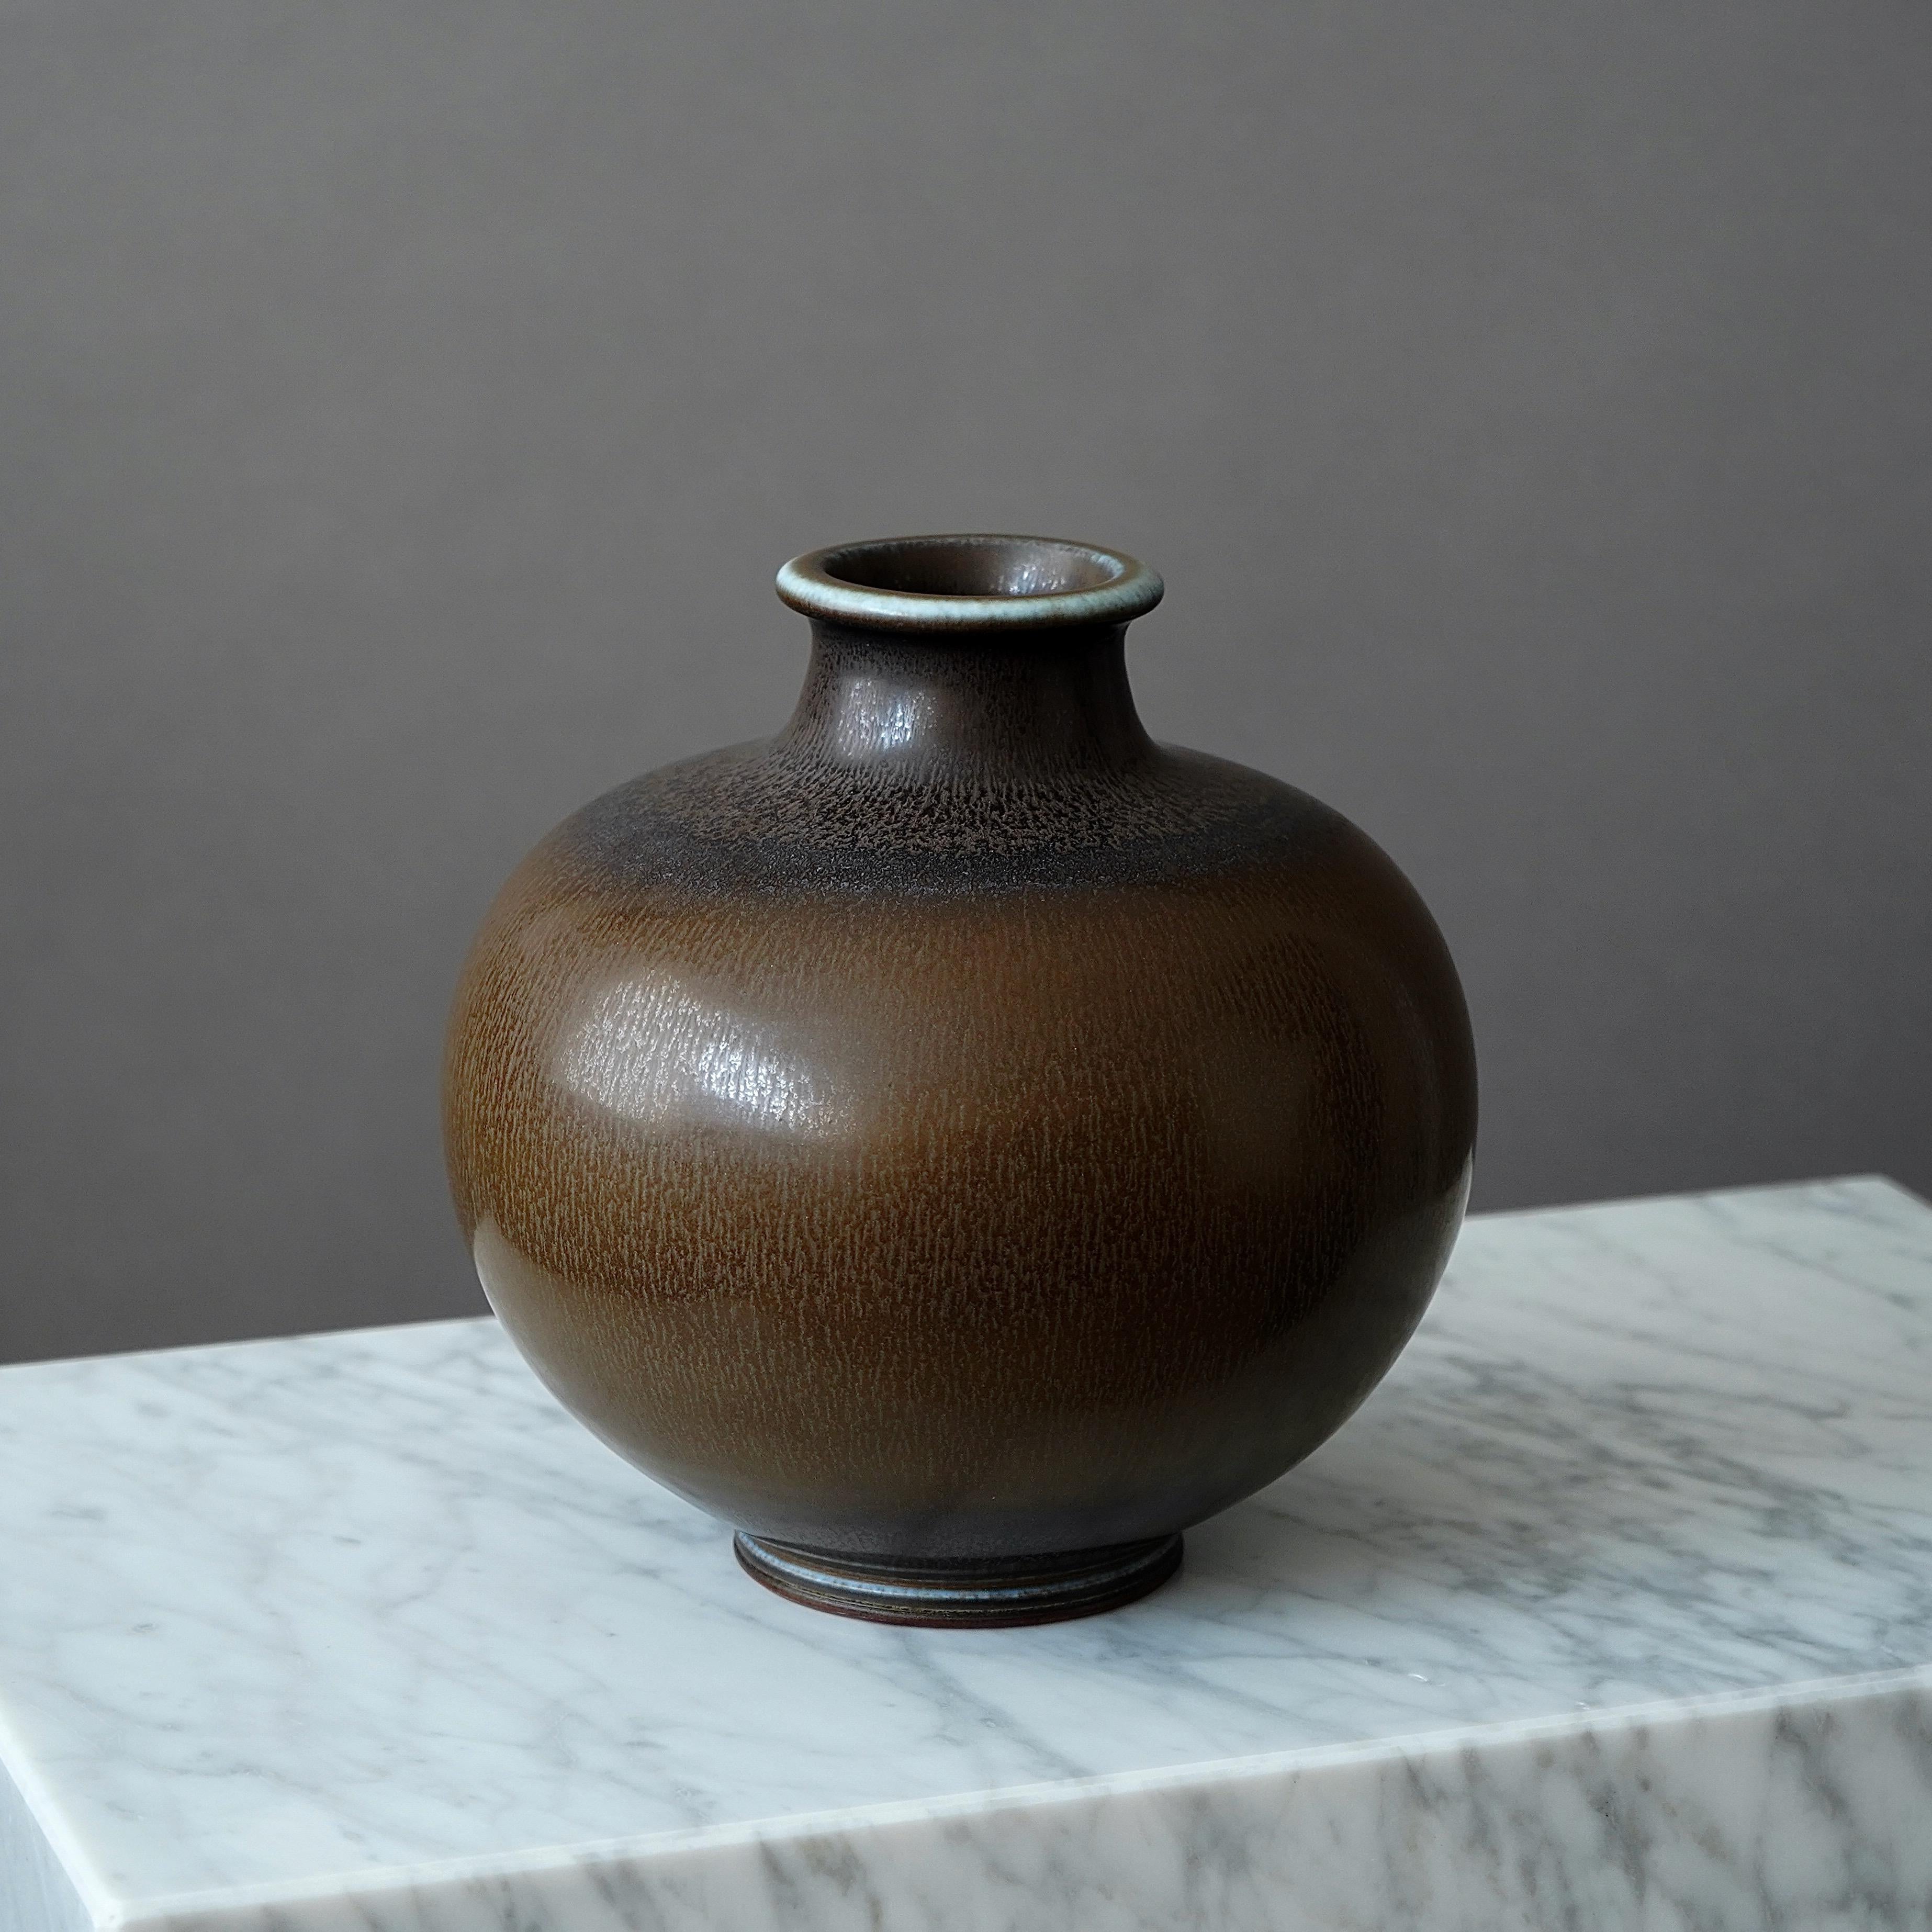 A large and beautiful stoneware vase with amazing hare’s fur glaze.
Made by master thrower Berndt Friberg, in the artist's studio at Gustavsberg, Sweden, 1963.

Excellent condition. 
Incised signature 